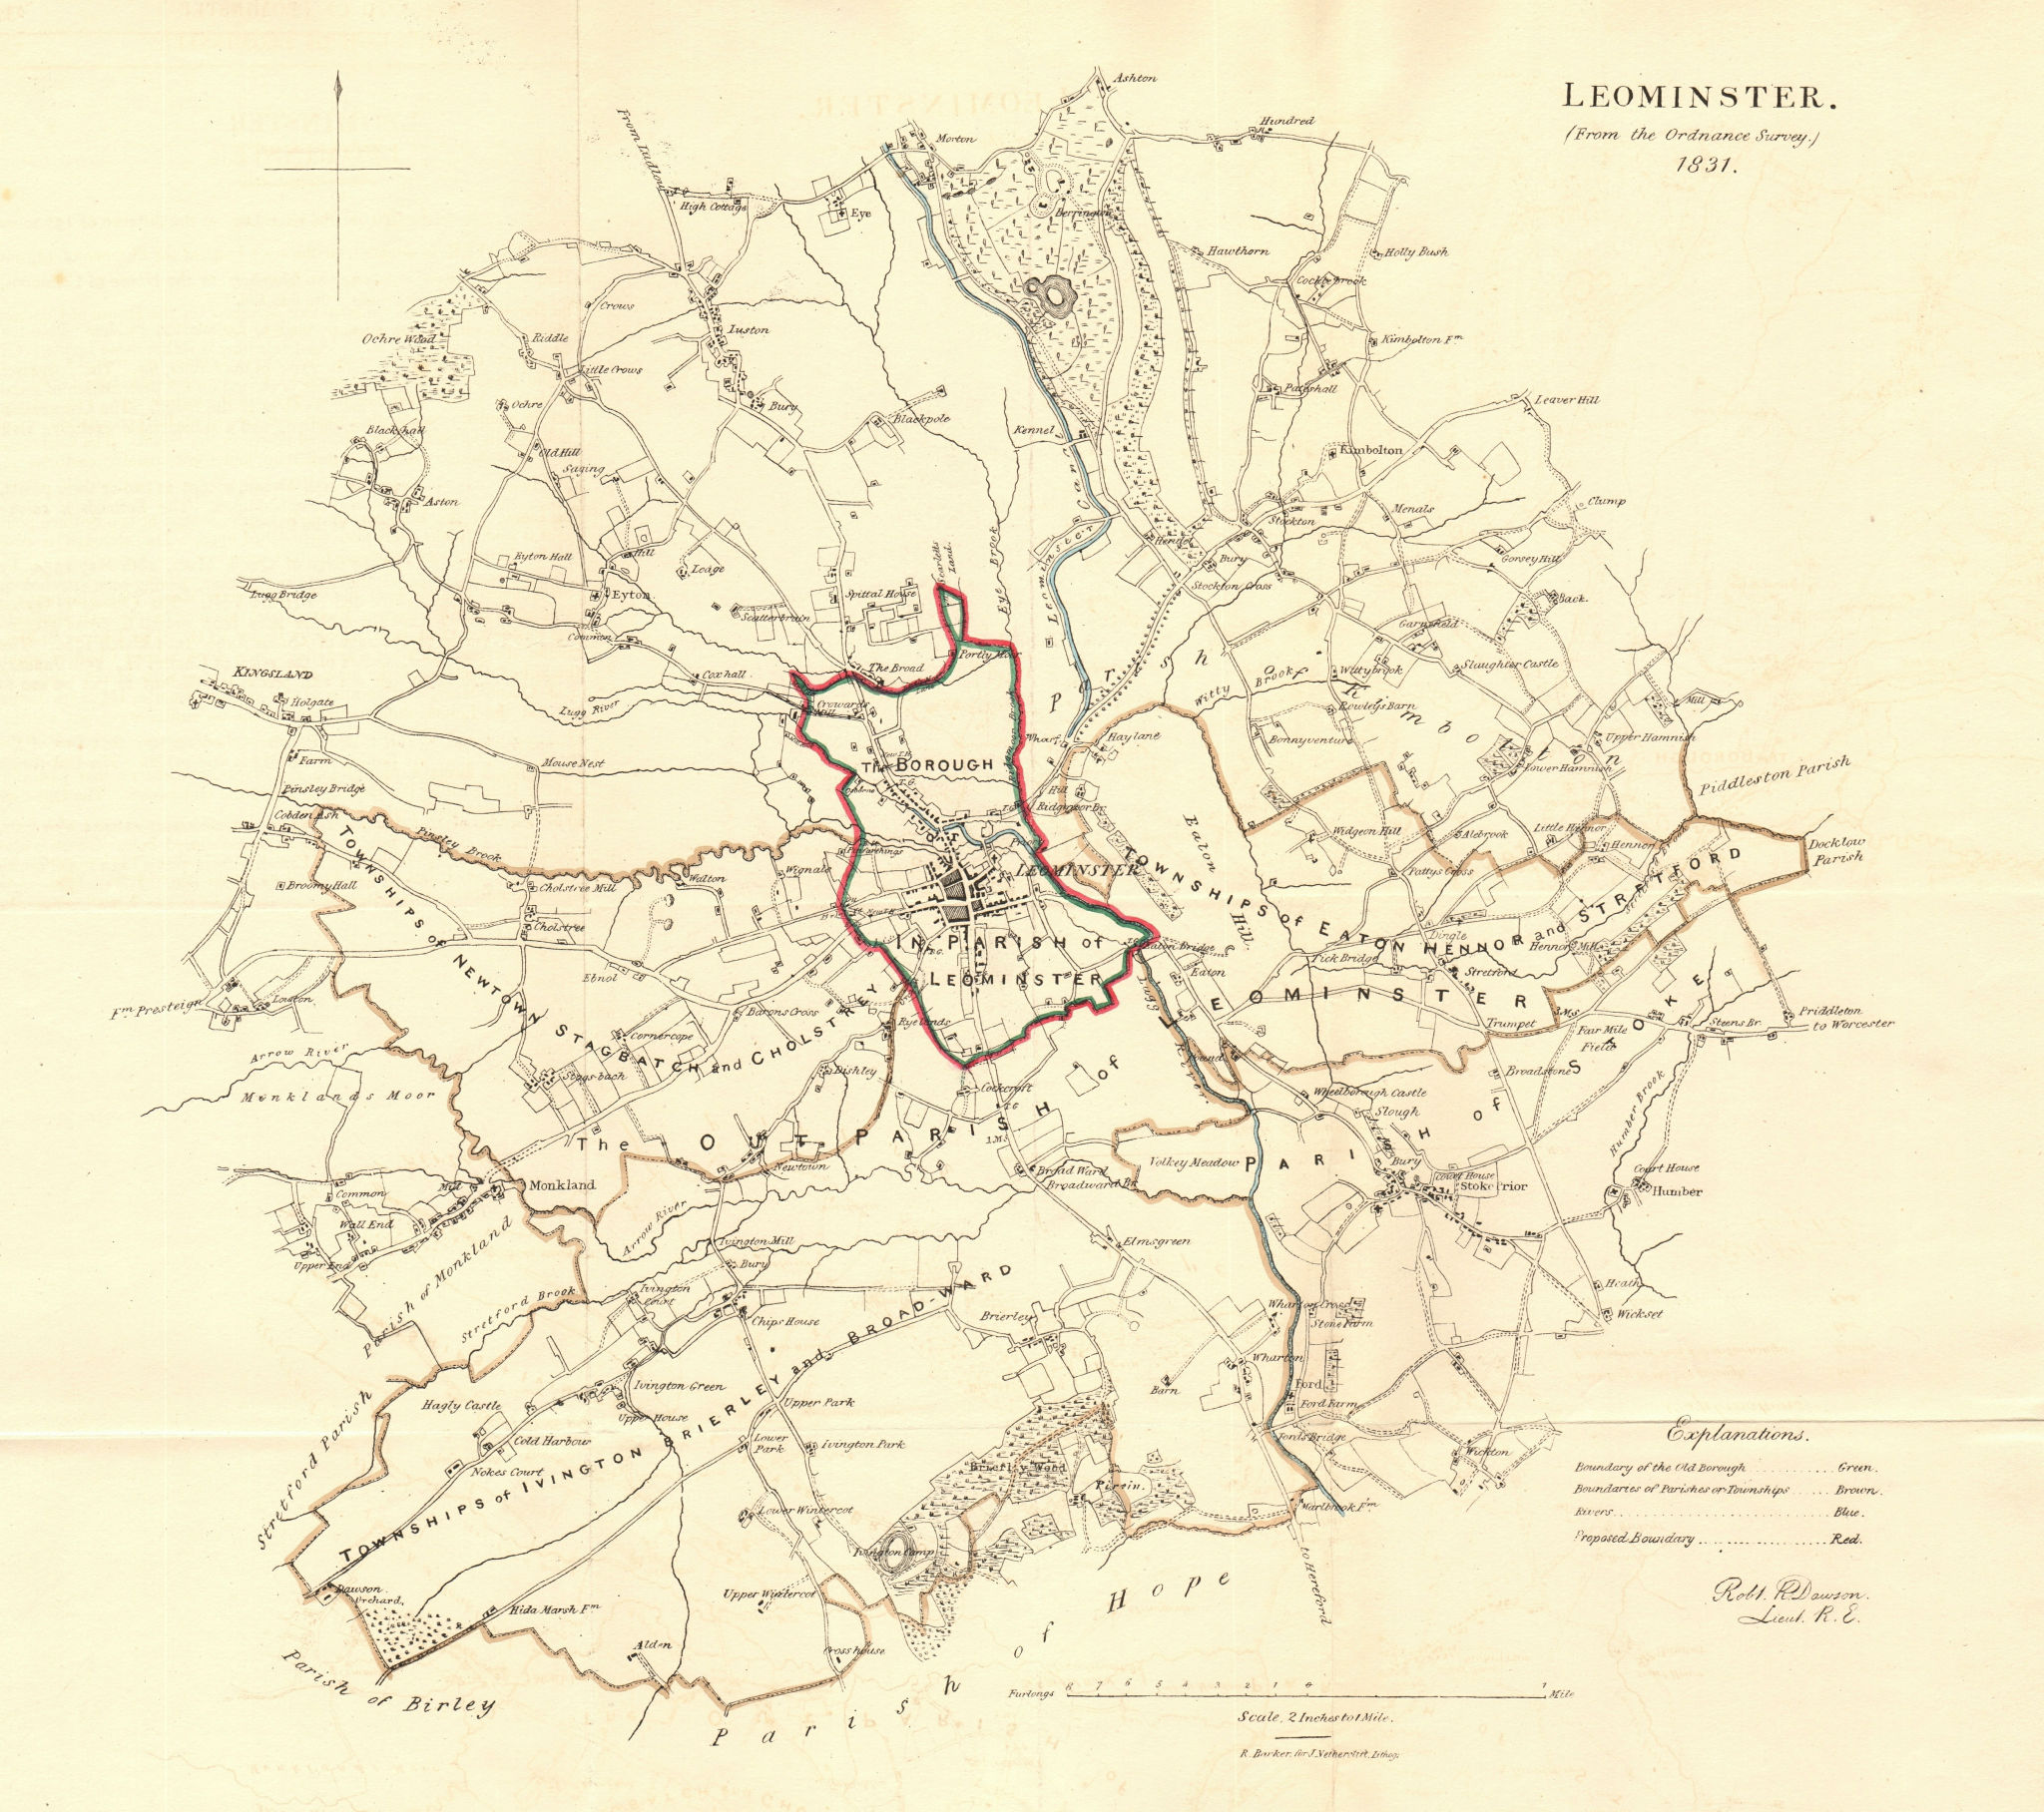 Associate Product LEOMINSTER borough/town plan. REFORM ACT. Herefordshire. DAWSON 1832 old map